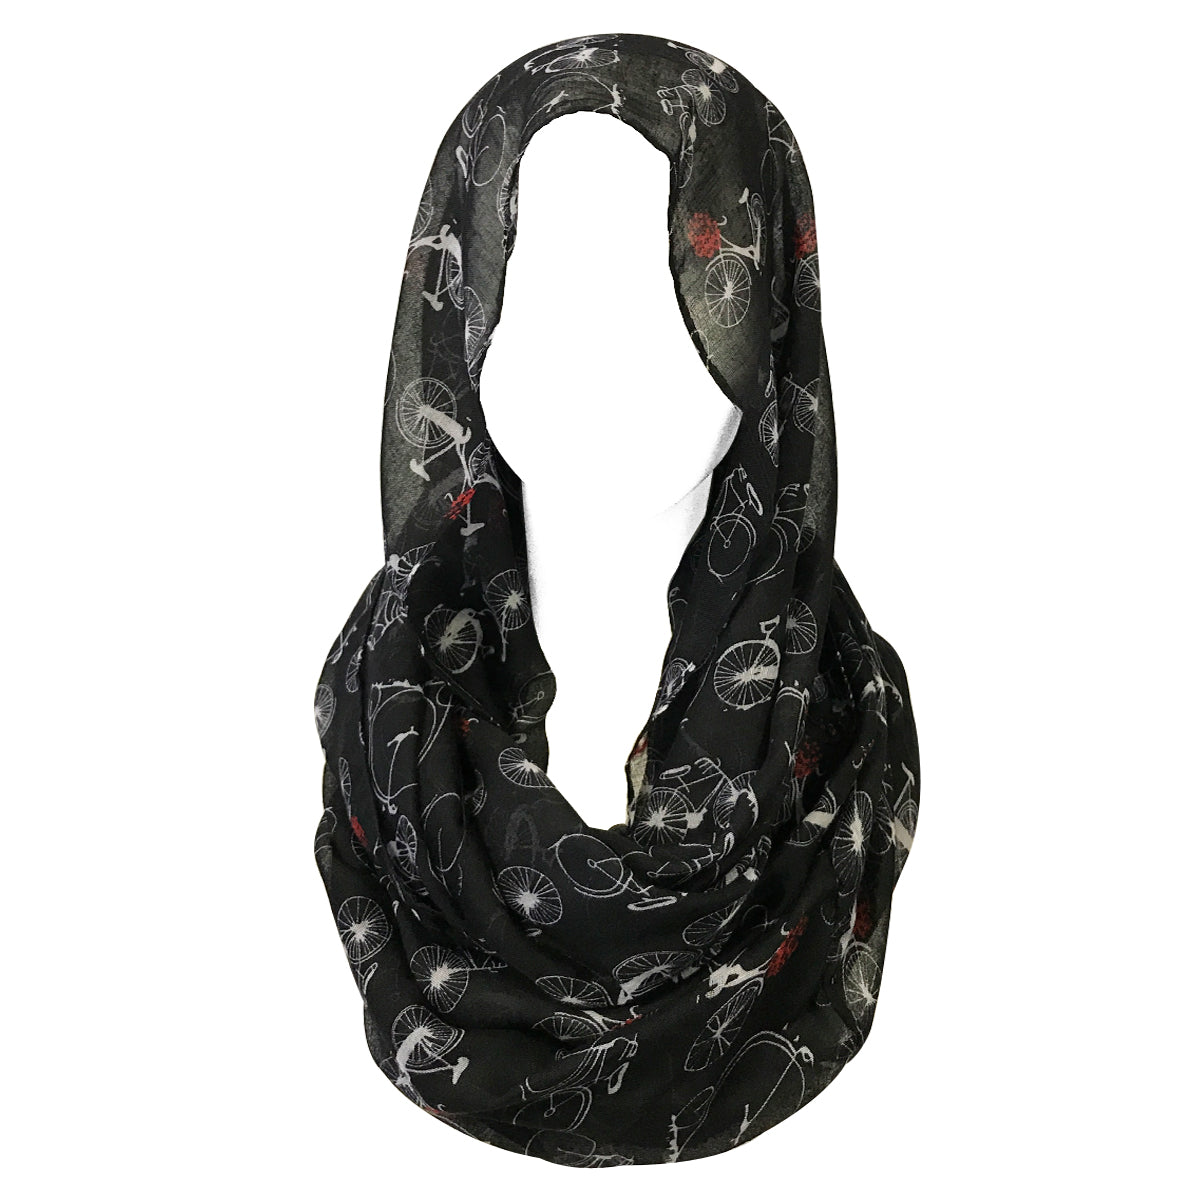 Wrapables Lightweight Vintage Bicycle Infinity Scarf